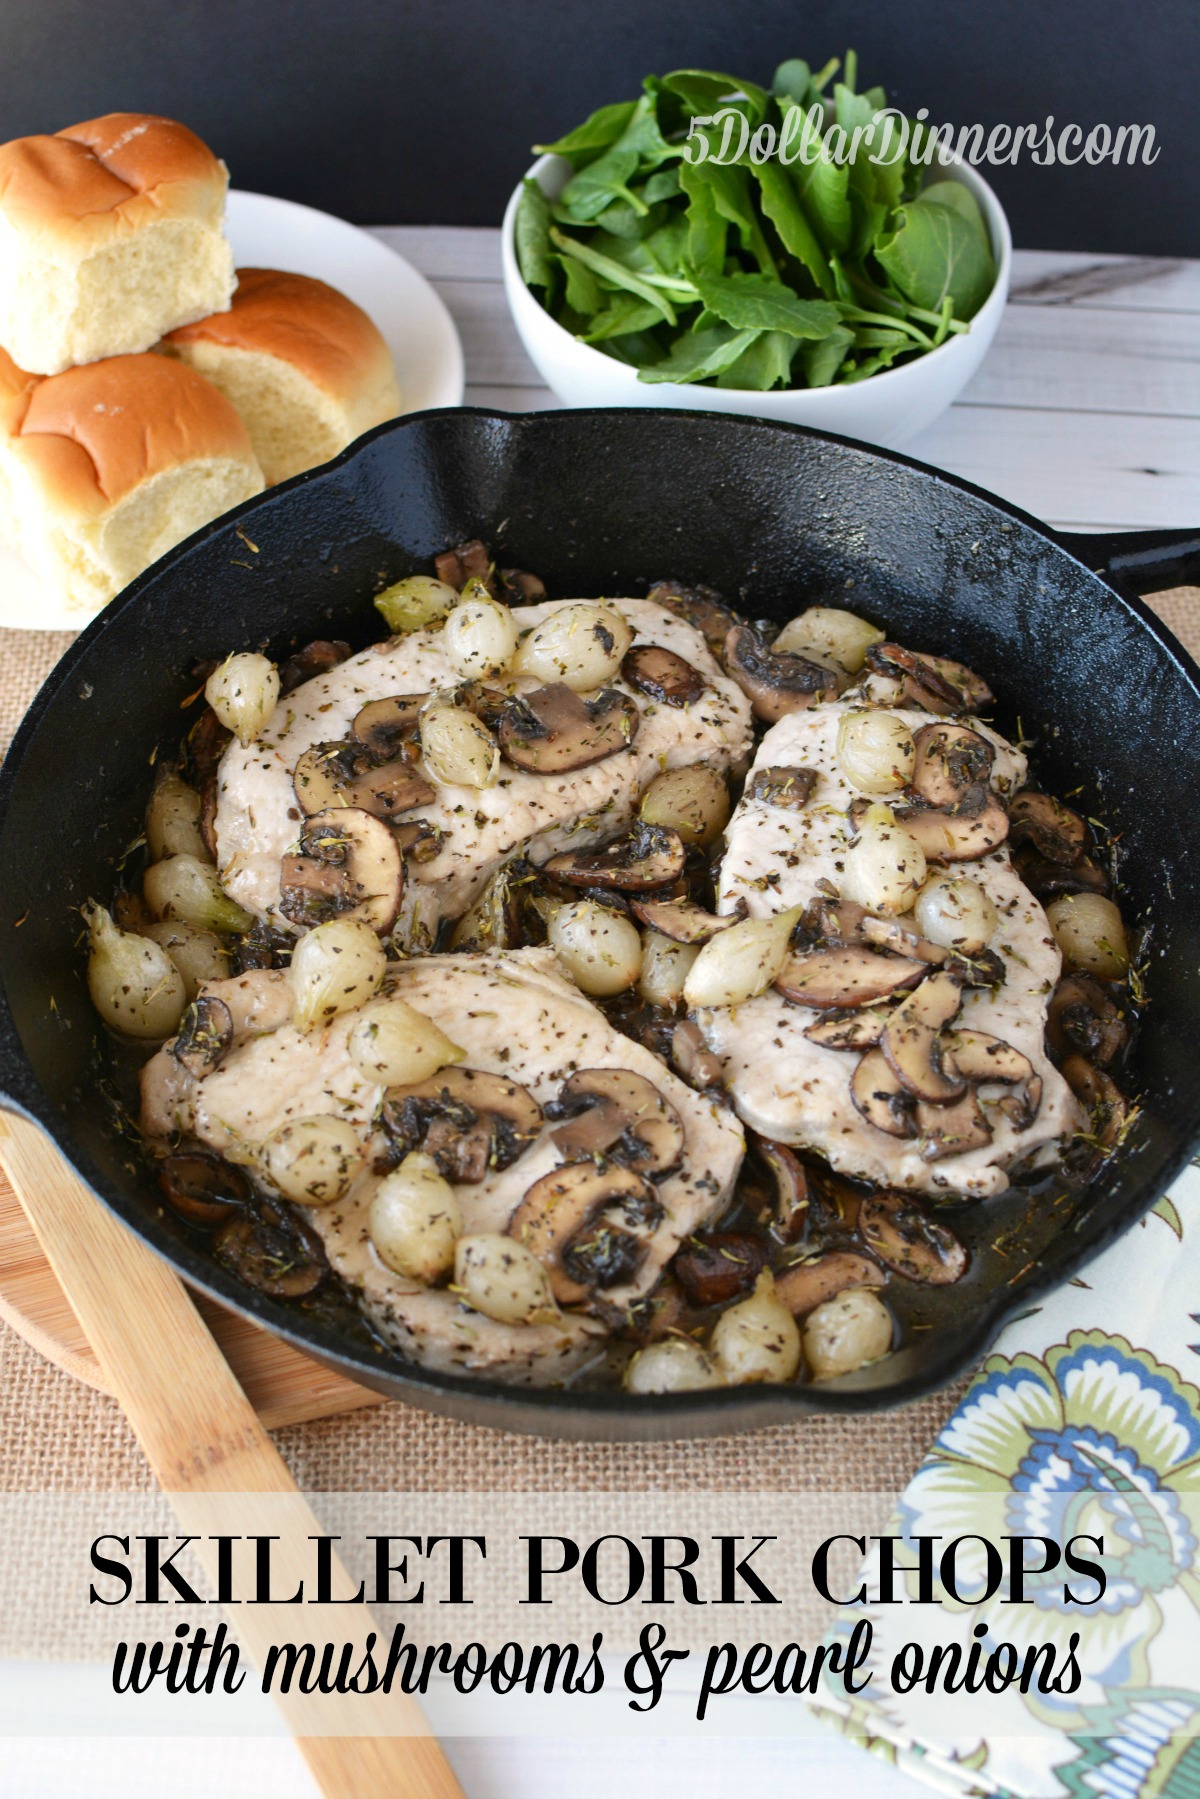 Skillet Pork Chops with Mushrooms and Pearled Onions - $5 Dinners